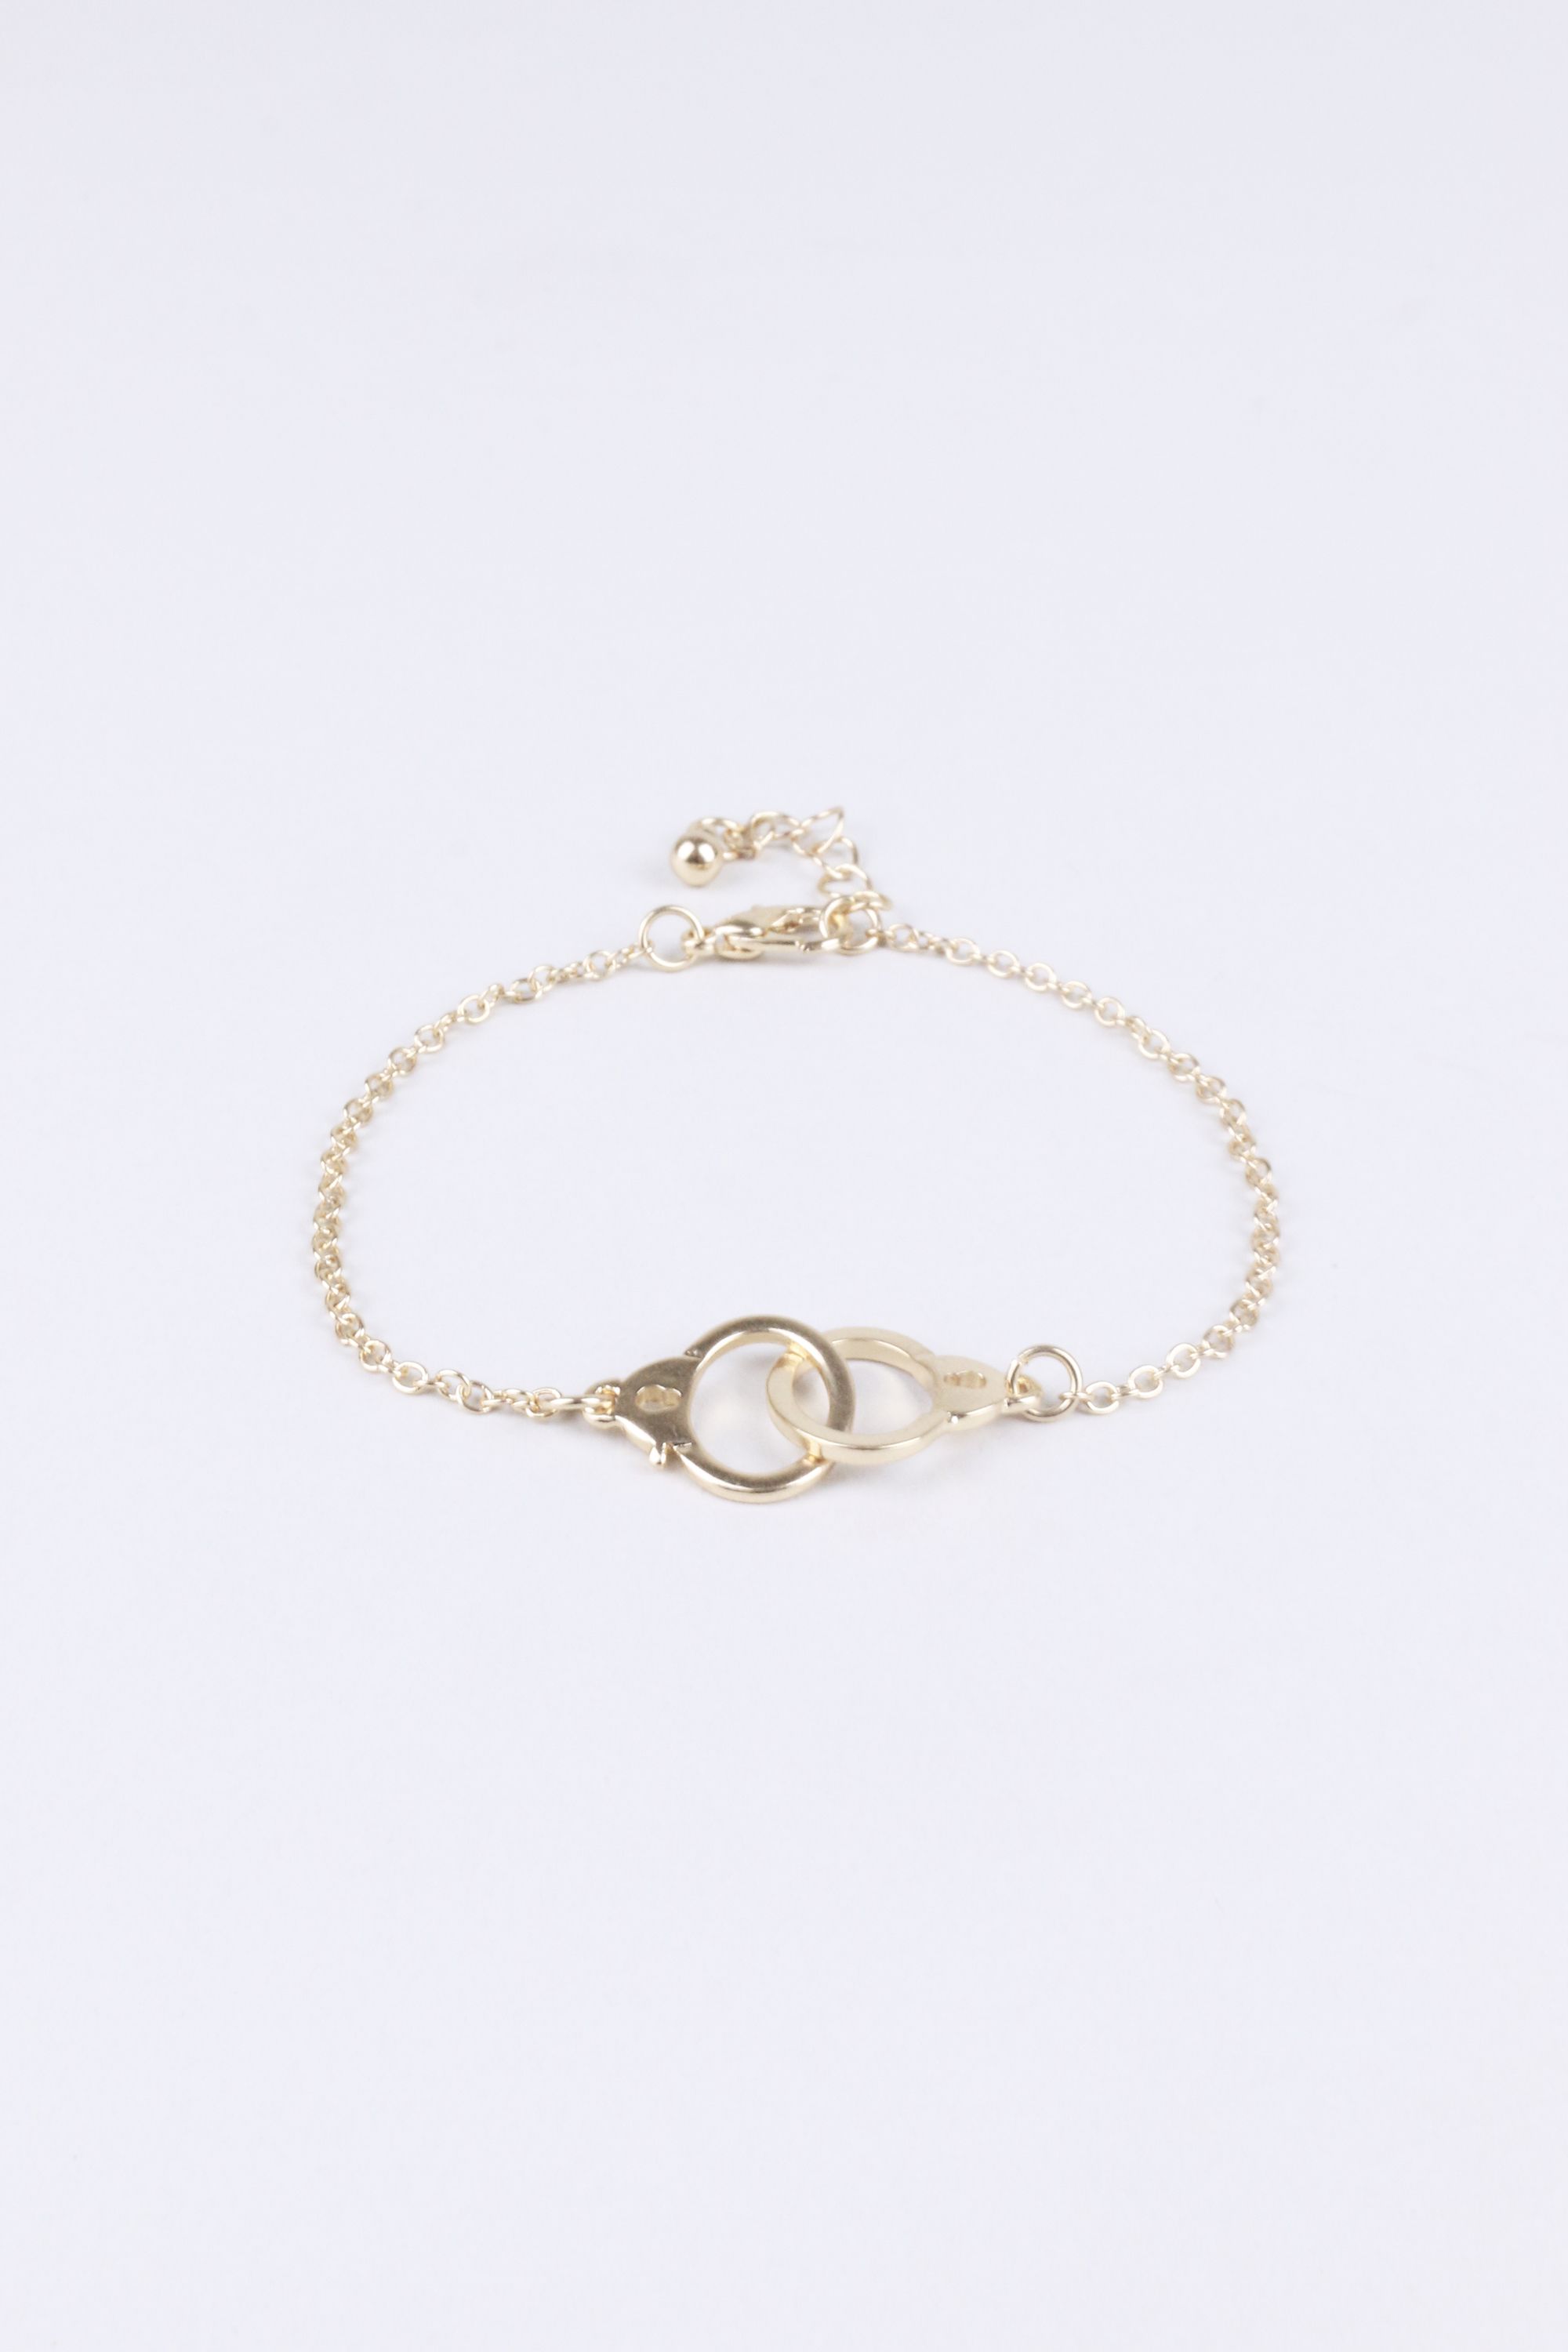 LMS Delicate Chain Bracelet With Interlocking Designs In Gold